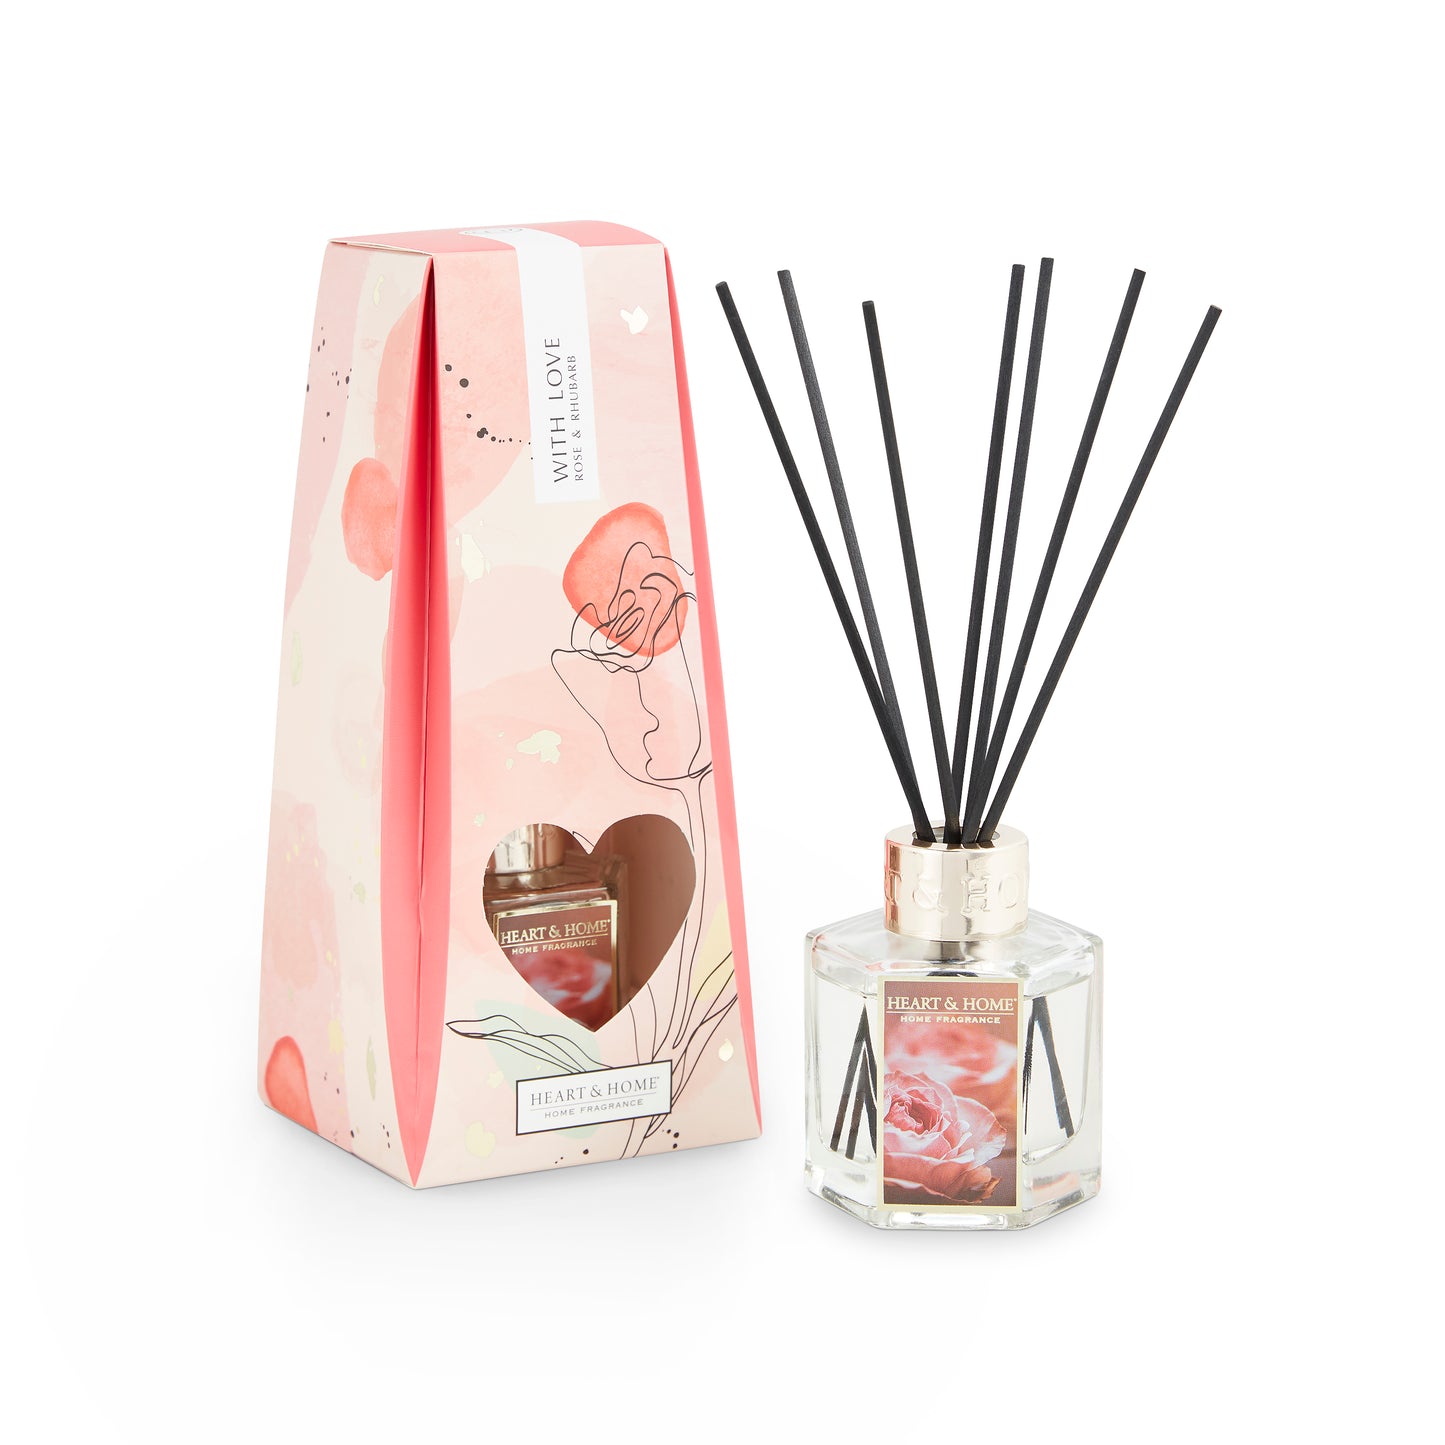 With Love Rose & Rhubarb Diffuser Blooming With Elegance Reed Diffuser Gift Idea